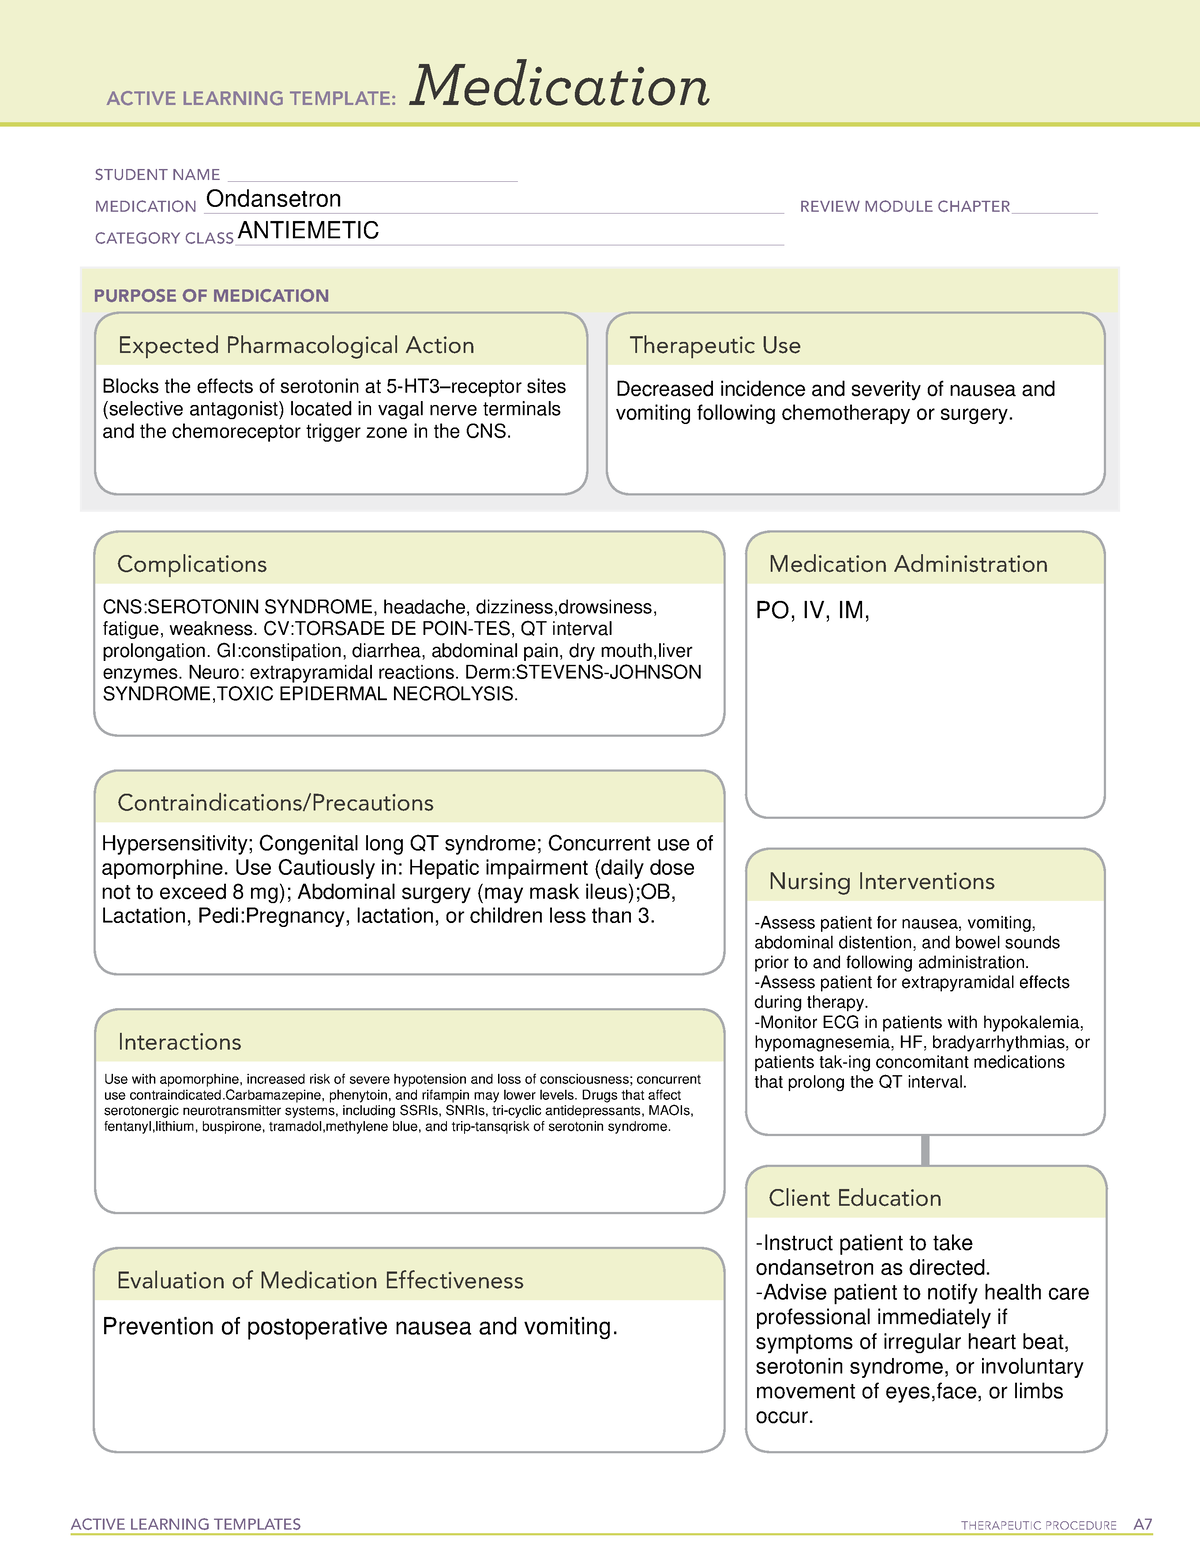 ondansetron-ati-template-active-learning-templates-therapeutic